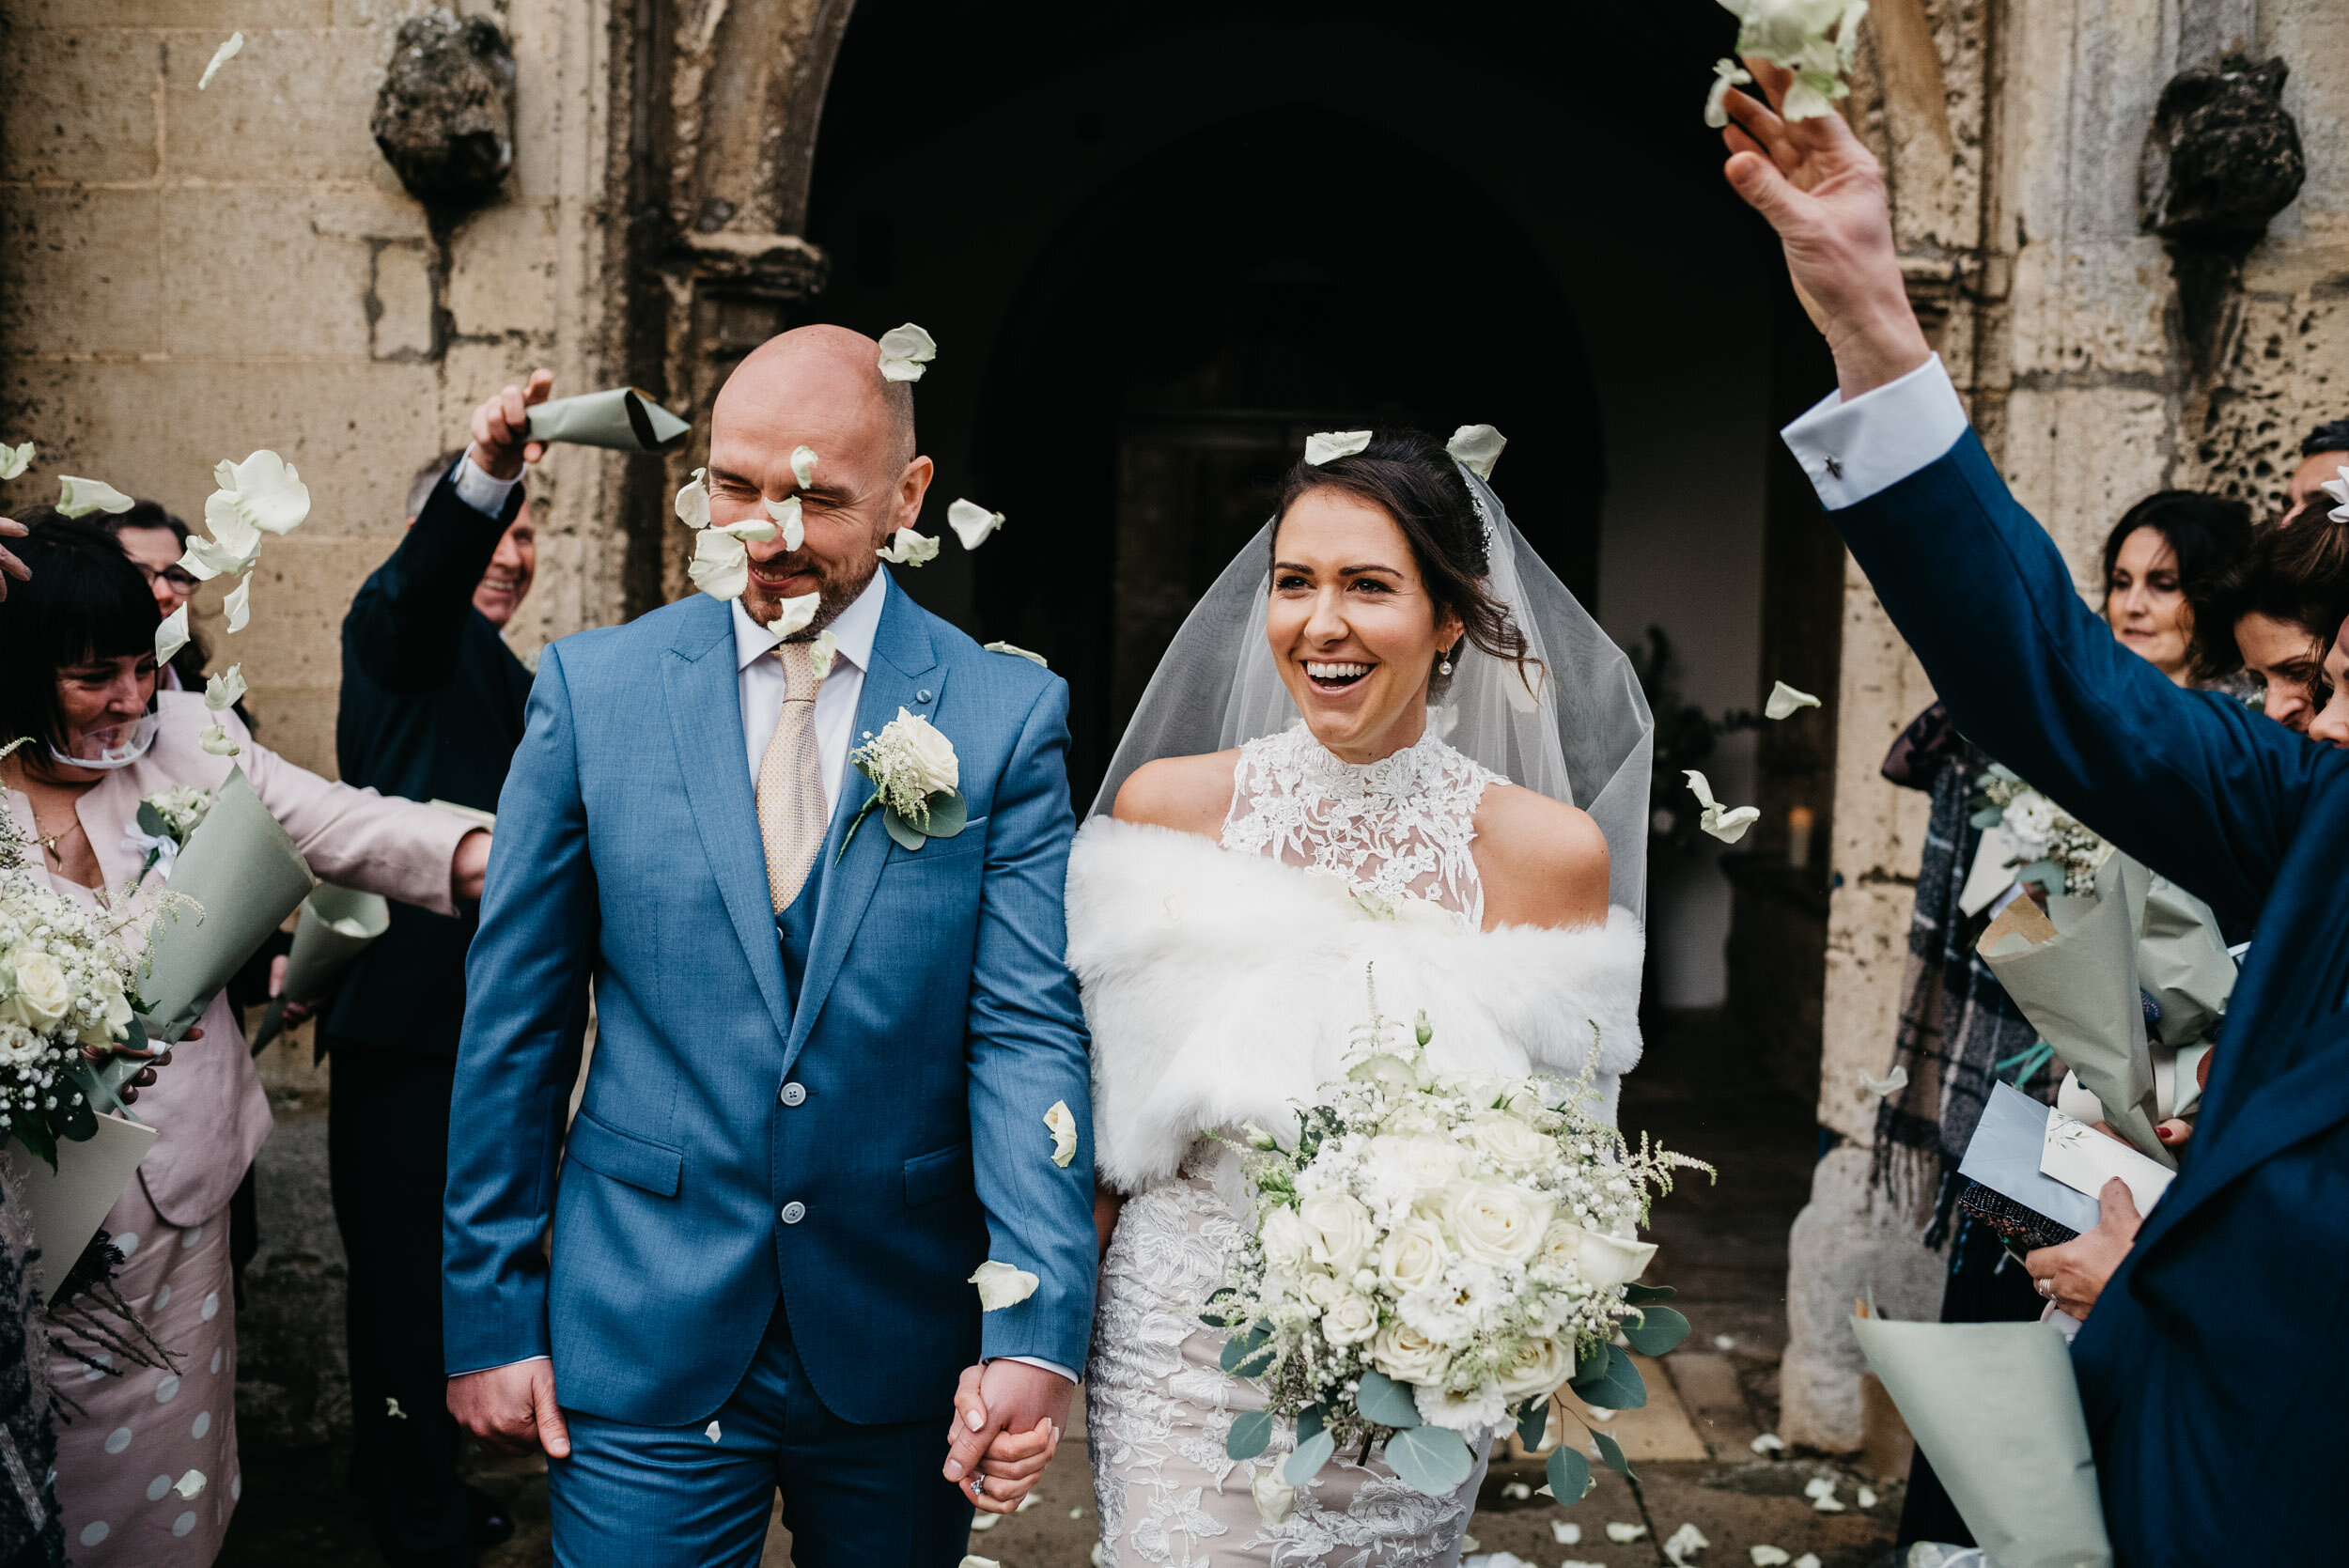 guests throwing confetti over the brider and groom at St Peters Church in Oundle